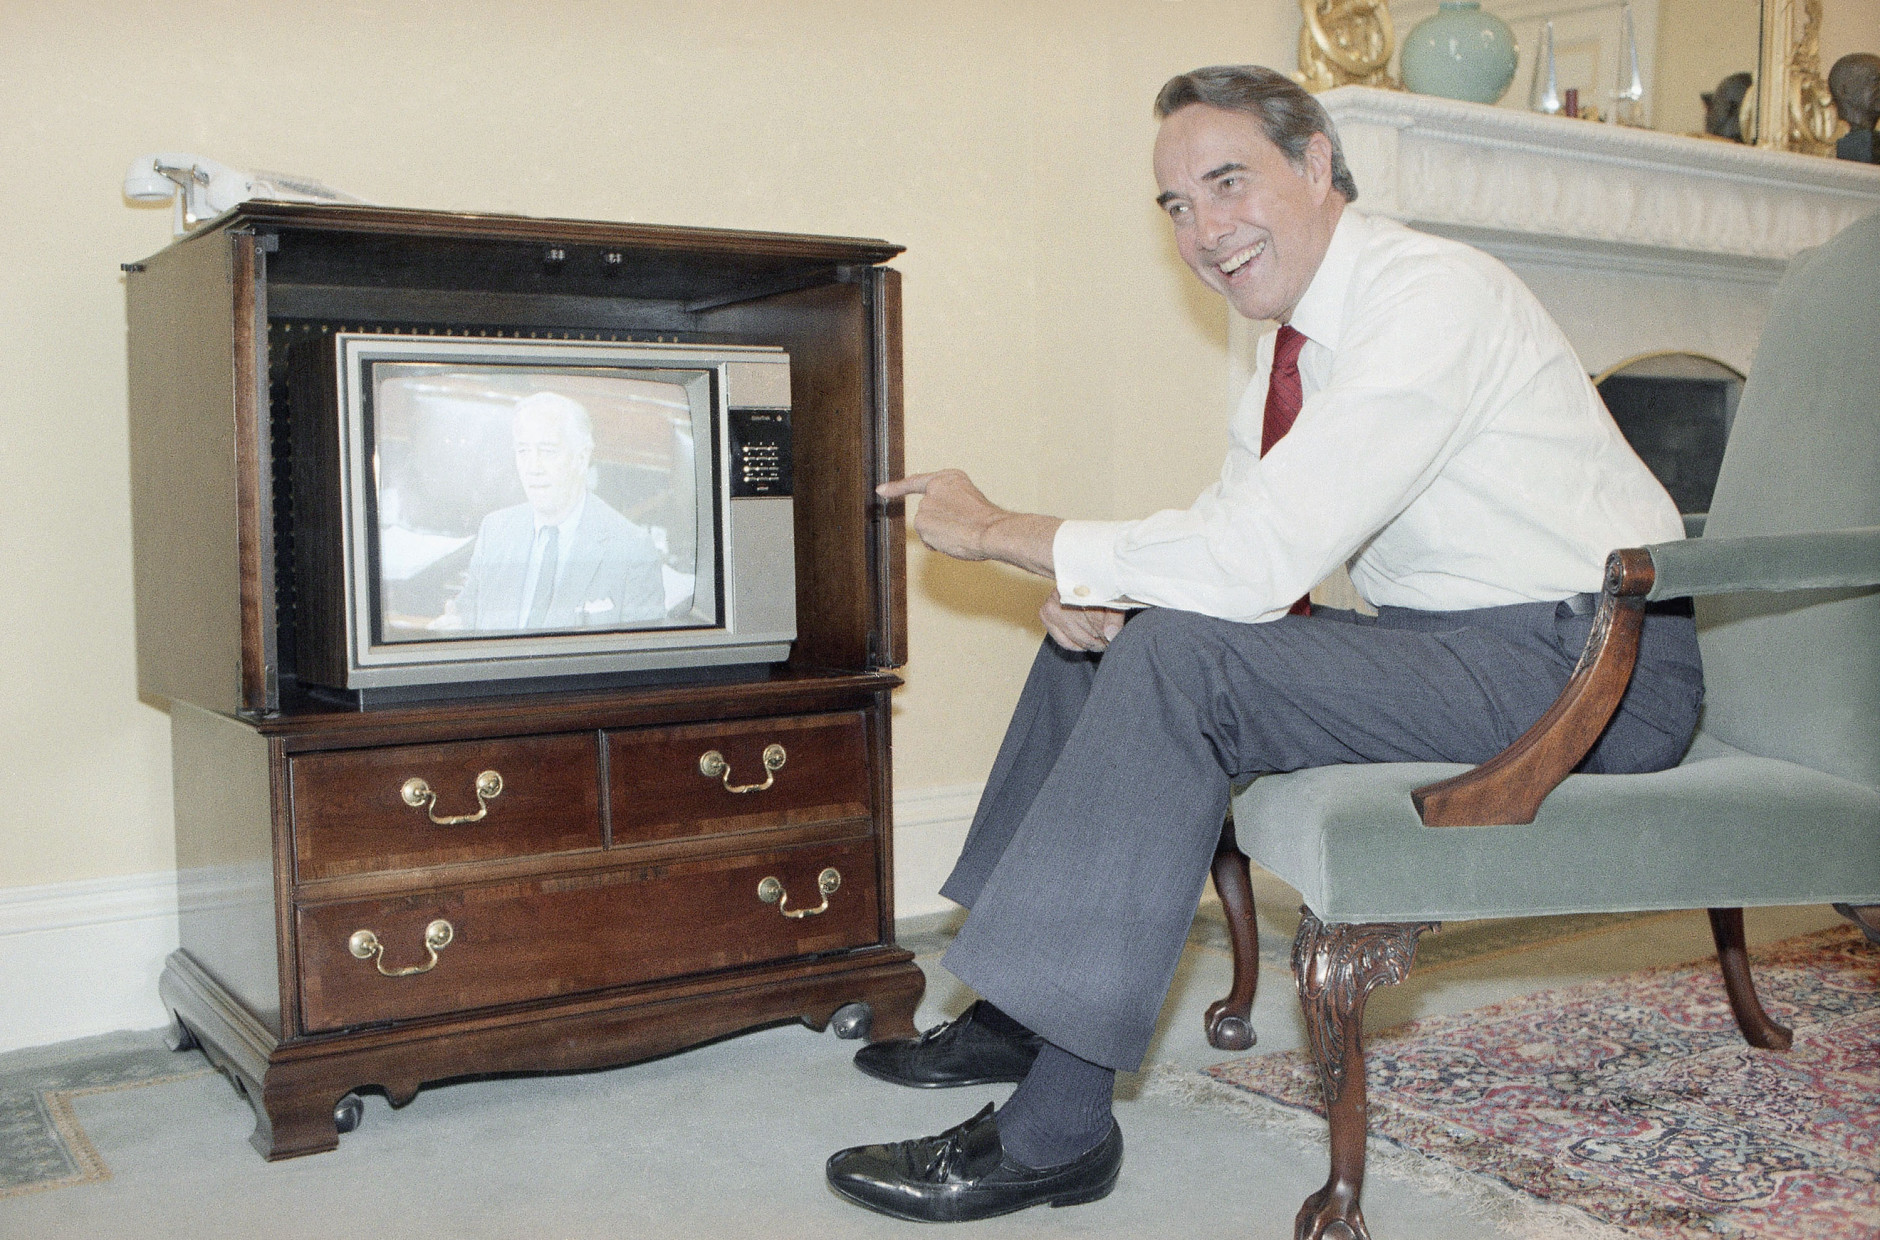 Senate Majority Leader Sen. Bob Dole of Kansas watches Sen. Charles McC. Mathias Jr. on television during a Senate floor debate, from his office on Capitol Hill, Washington, Monday, June 2, 1986. The Senate launched a six-week experiment of making its floor sessions available for live broadcast by television networks. (AP Photo/Lana Harris)